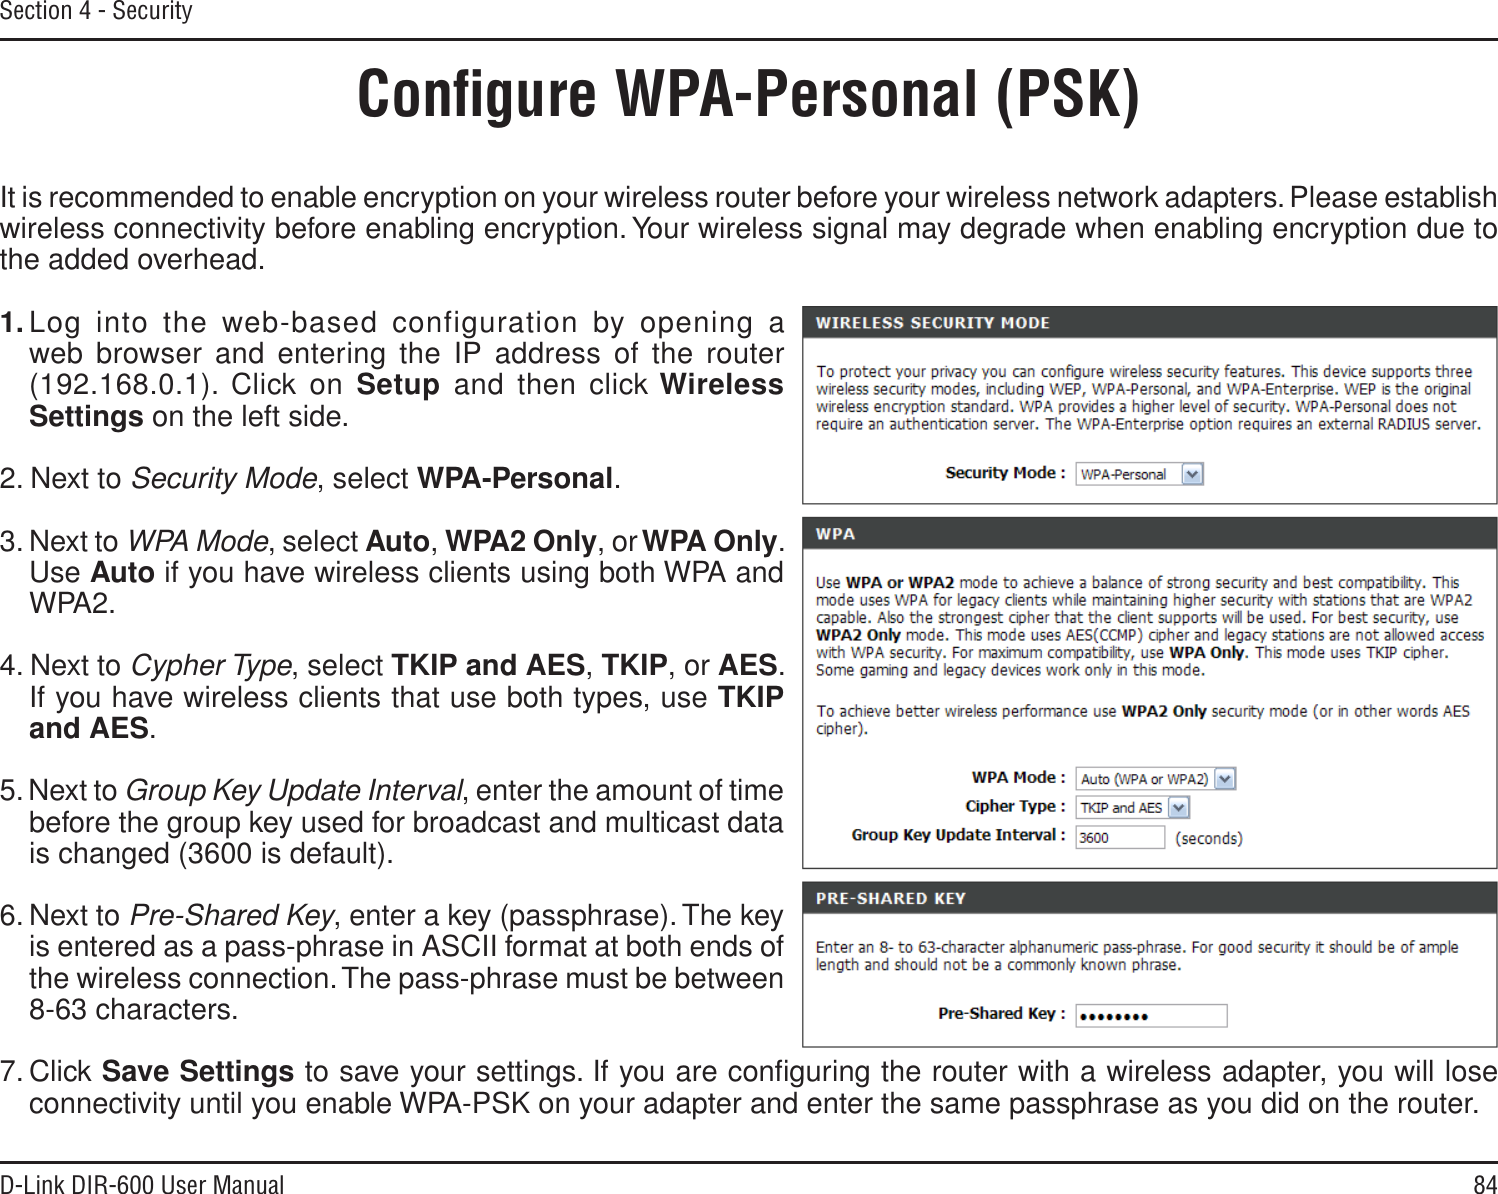 84D-Link DIR-600 User ManualSection 4 - SecurityConﬁgure WPA-Personal (PSK)It is recommended to enable encryption on your wireless router before your wireless network adapters. Please establish wireless connectivity before enabling encryption. Your wireless signal may degrade when enabling encryption due to the added overhead.1. Log into the web-based configuration by opening a web browser and entering the IP address of the router (192.168.0.1). Click on Setup and then click WirelessSettings on the left side.2. Next to Security Mode, select WPA-Personal.3. Next to WPA Mode, select Auto,WPA2 Only, orWPA Only. Use Auto if you have wireless clients using both WPA and WPA2.4. Next to Cypher Type, select TKIP and AES,TKIP, or AES. If you have wireless clients that use both types, use TKIPand AES.5. Next to Group Key Update Interval, enter the amount of time before the group key used for broadcast and multicast data is changed (3600 is default).6. Next to Pre-Shared Key, enter a key (passphrase). The key is entered as a pass-phrase in ASCII format at both ends of the wireless connection. The pass-phrase must be between 8-63 characters. 7. Click Save Settings to save your settings. If you are conﬁguring the router with a wireless adapter, you will lose connectivity until you enable WPA-PSK on your adapter and enter the same passphrase as you did on the router.